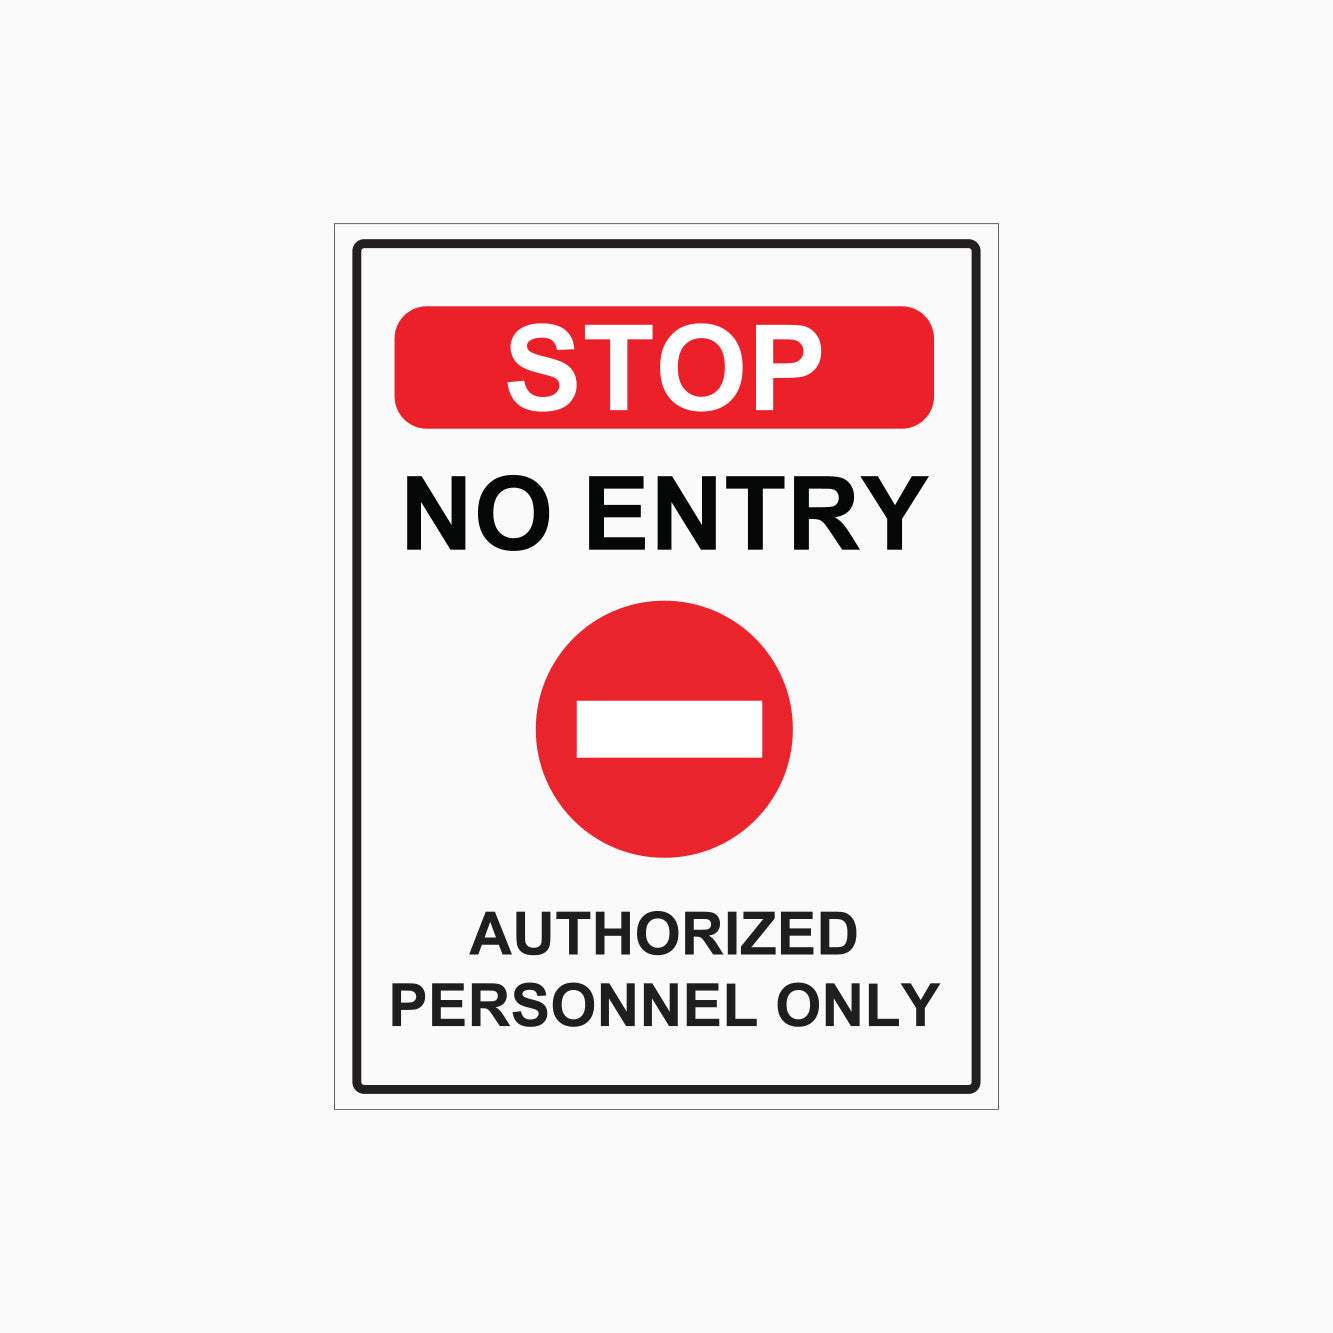 STOP NO ENTRY AUTHORIZED PERSONNEL ONLY SIGN